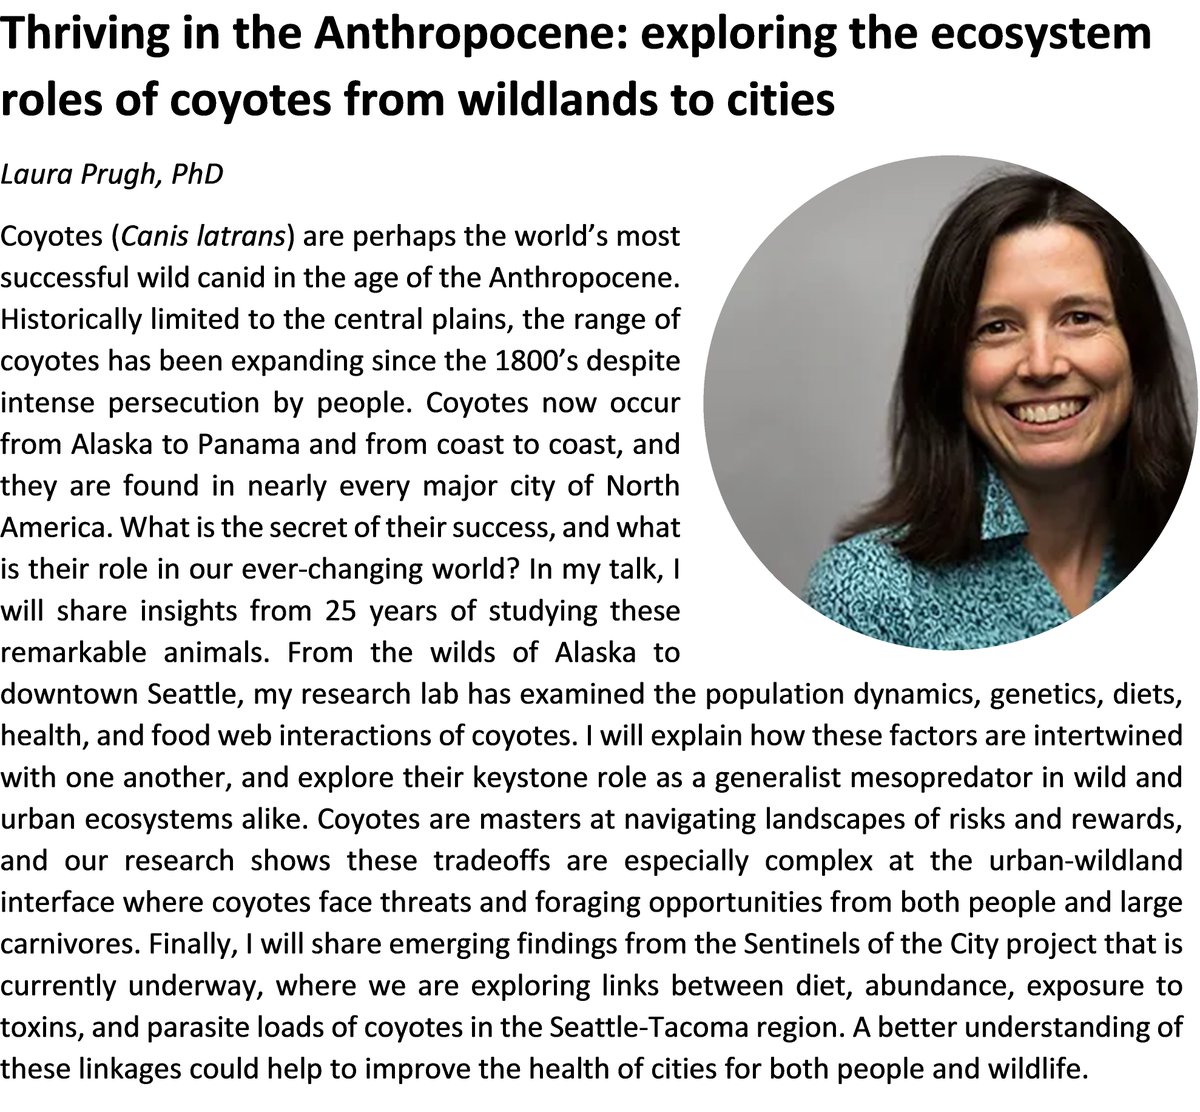 Meet our Keynote Speakers for #CSC2024 from June 21-23, 2024 in #Seattle: Today, @LauraPrugh from @UW who will be talking about the role of #coyotes in rural and urban #ecosystems.  #CanineScience